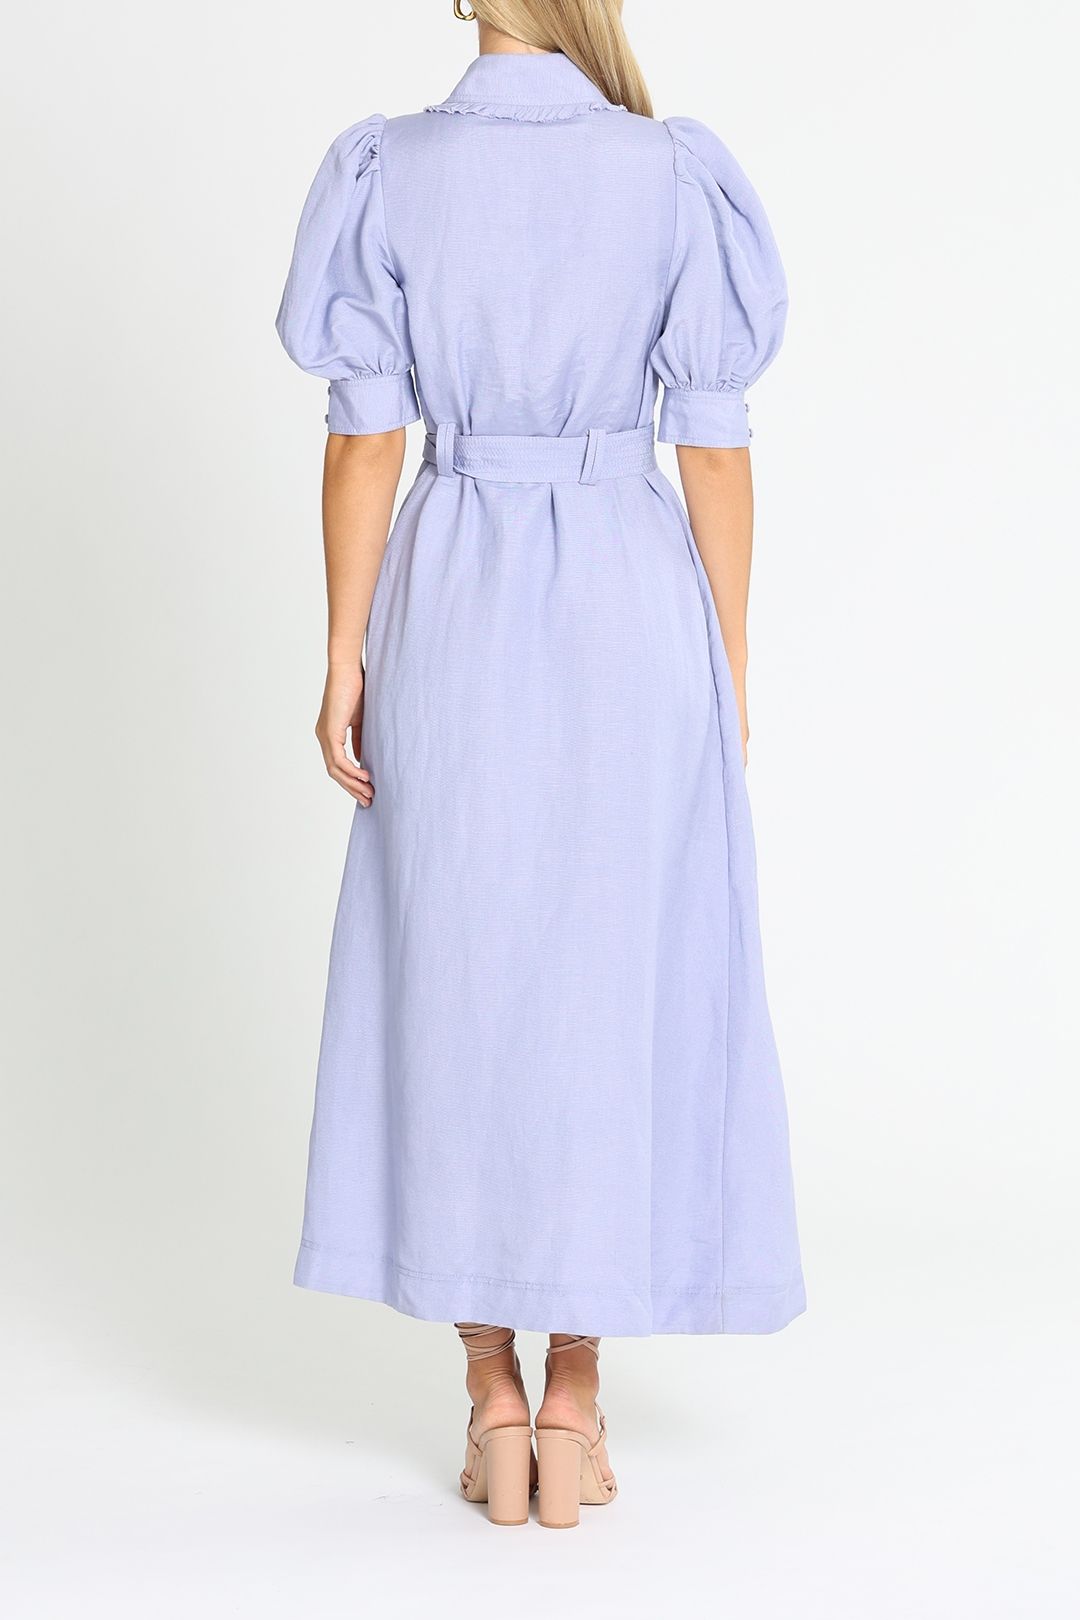 Aje Madeleine Belted Midi Dress Lilac Collared